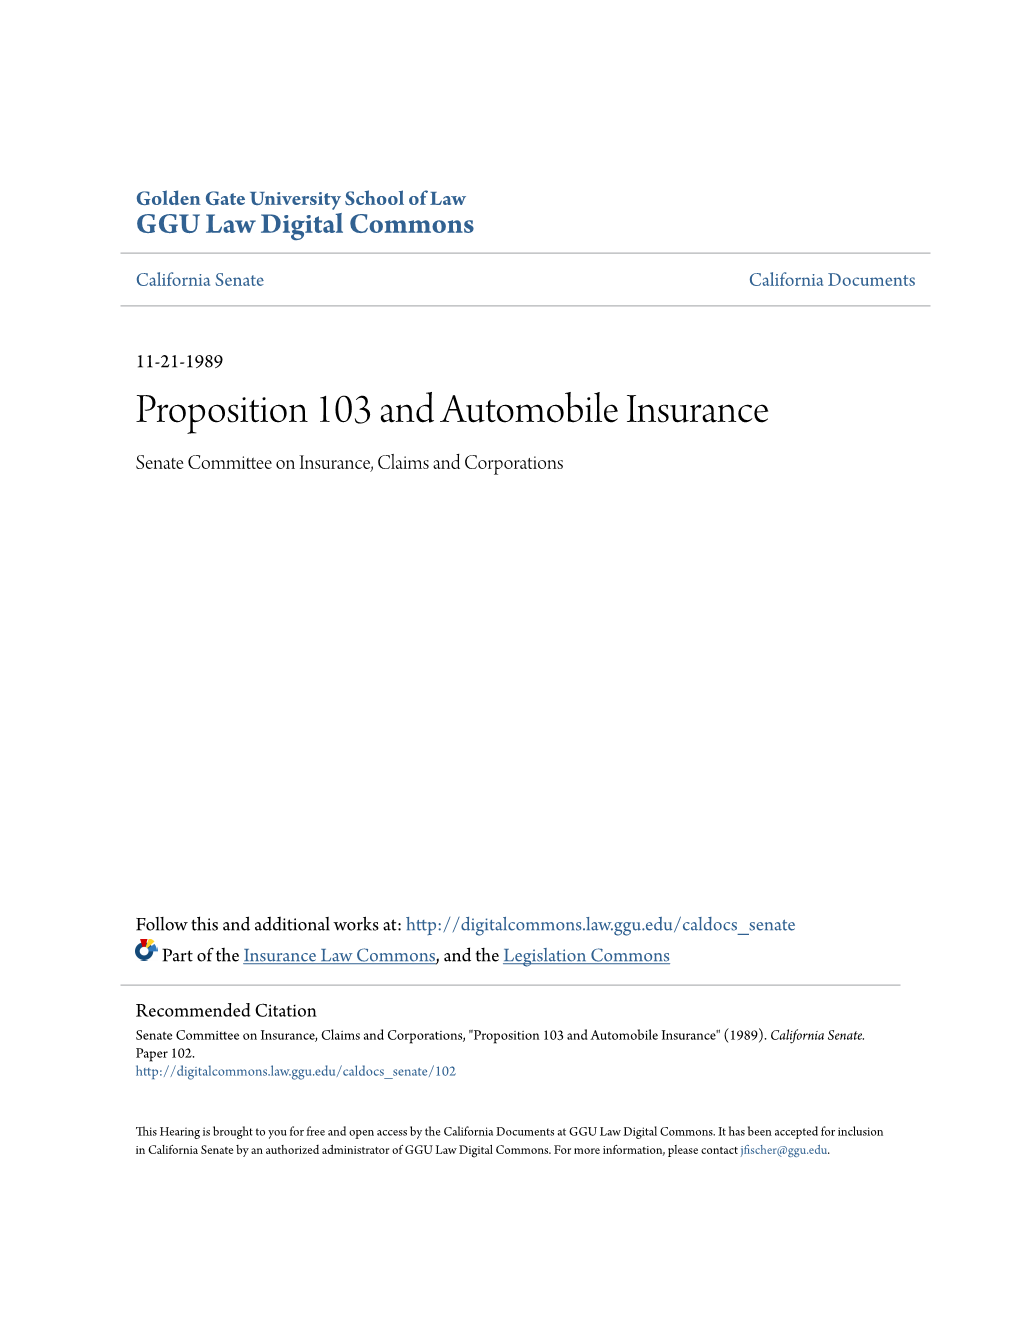 Proposition 103 and Automobile Insurance Senate Committee on Insurance, Claims and Corporations